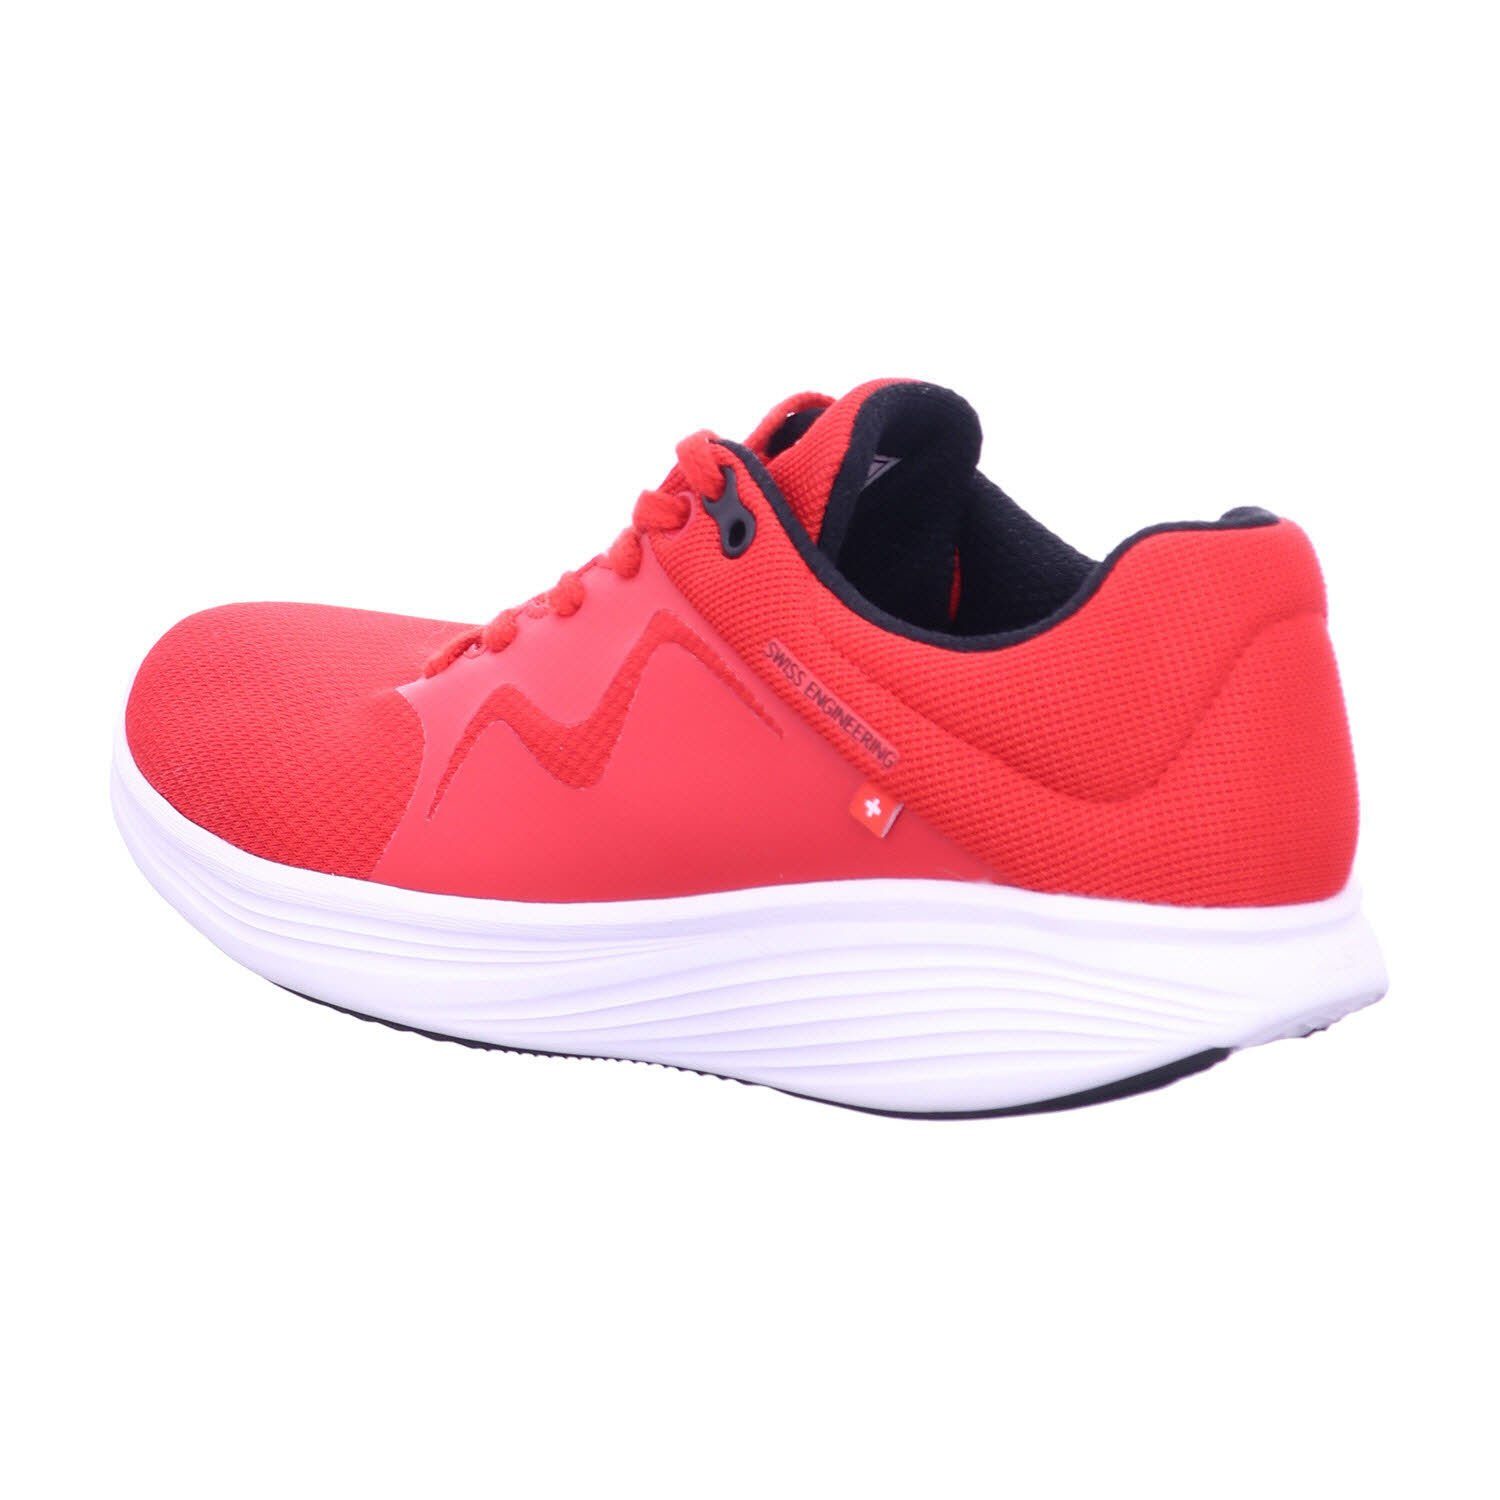 Sneaker (RED) MBT Rot